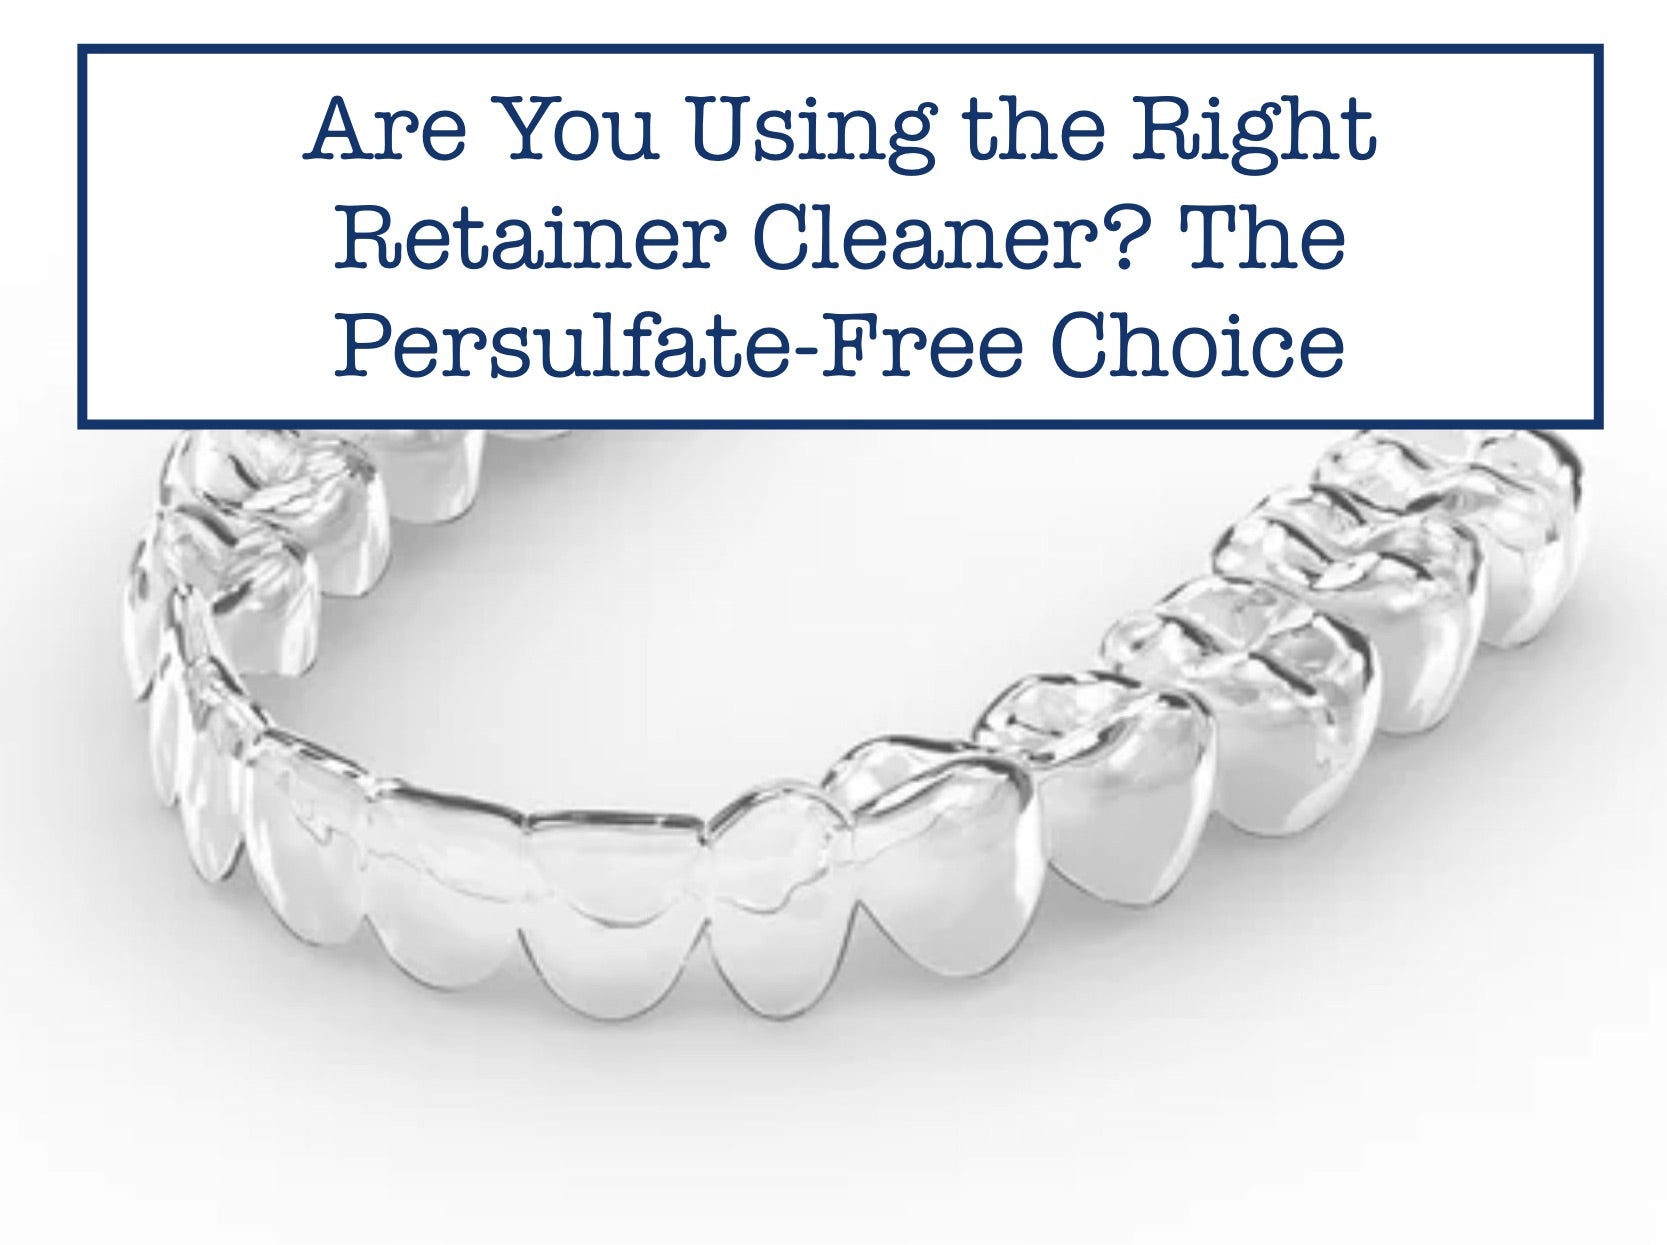 Are You Using the Right Retainer Cleaner? The Persulfate-Free Choice